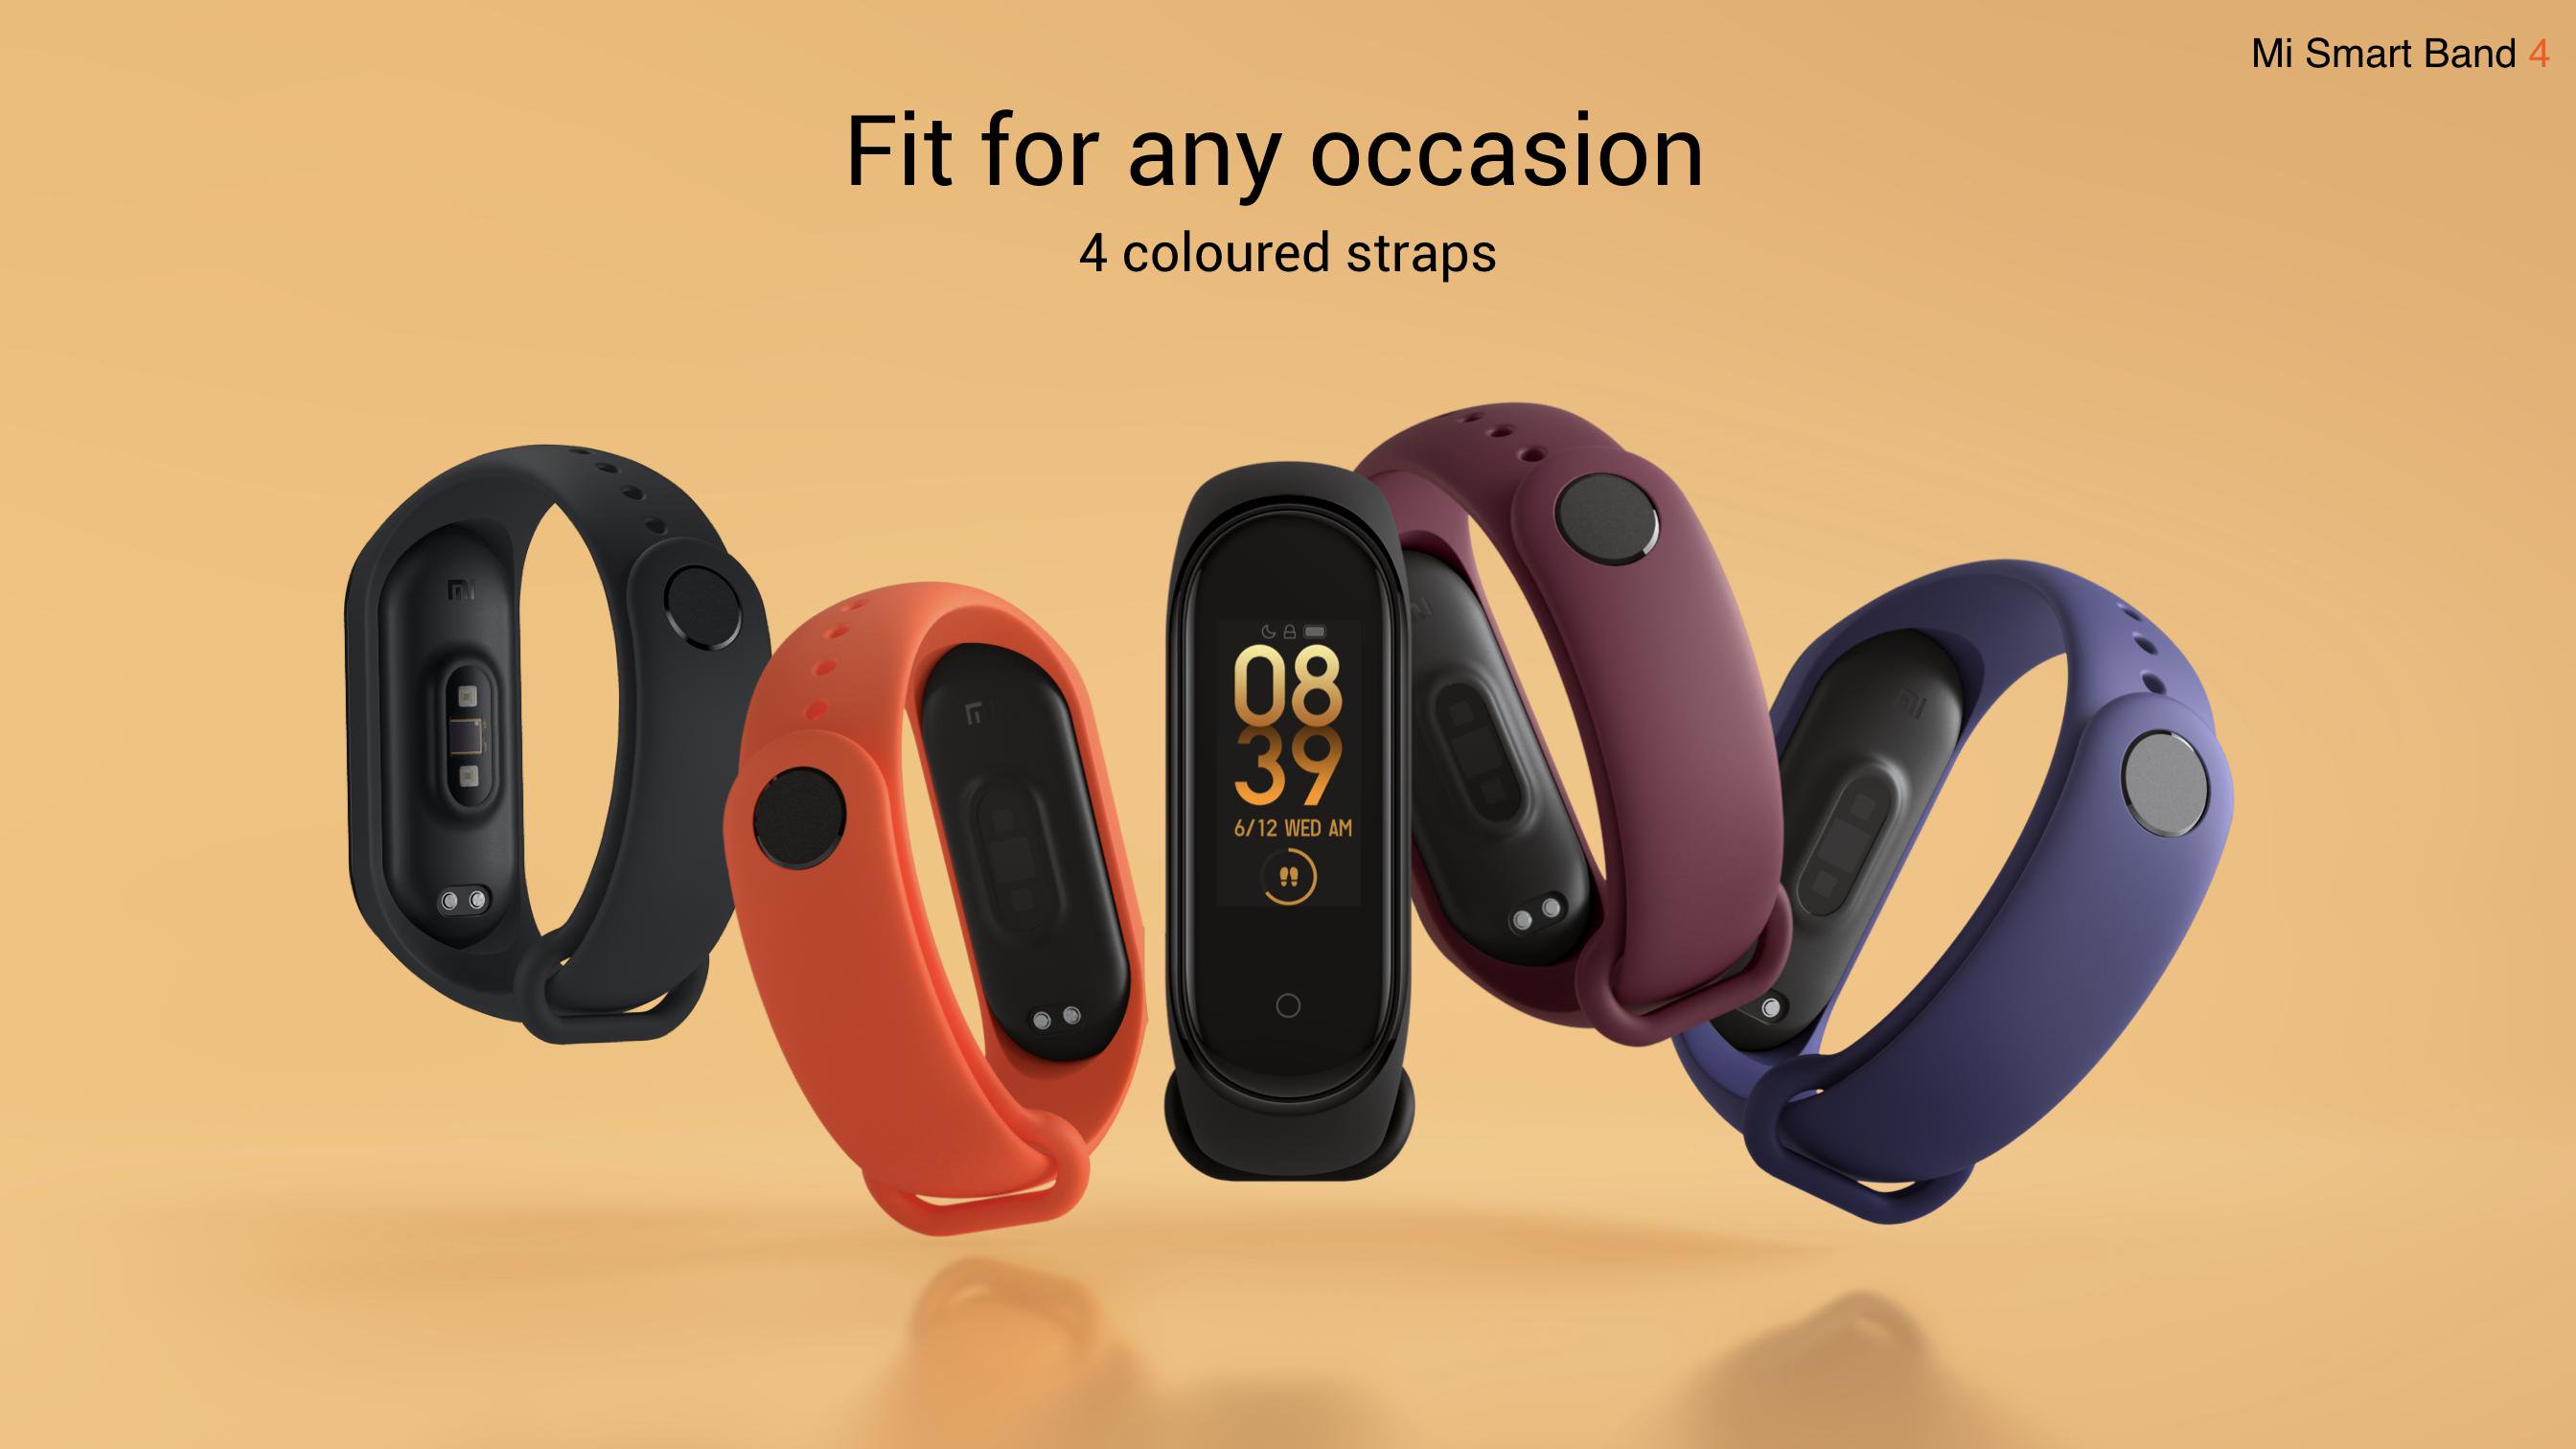 Huami: No Exclusive deal signed with Xiaomi for Smart Wearables - Gizmochina